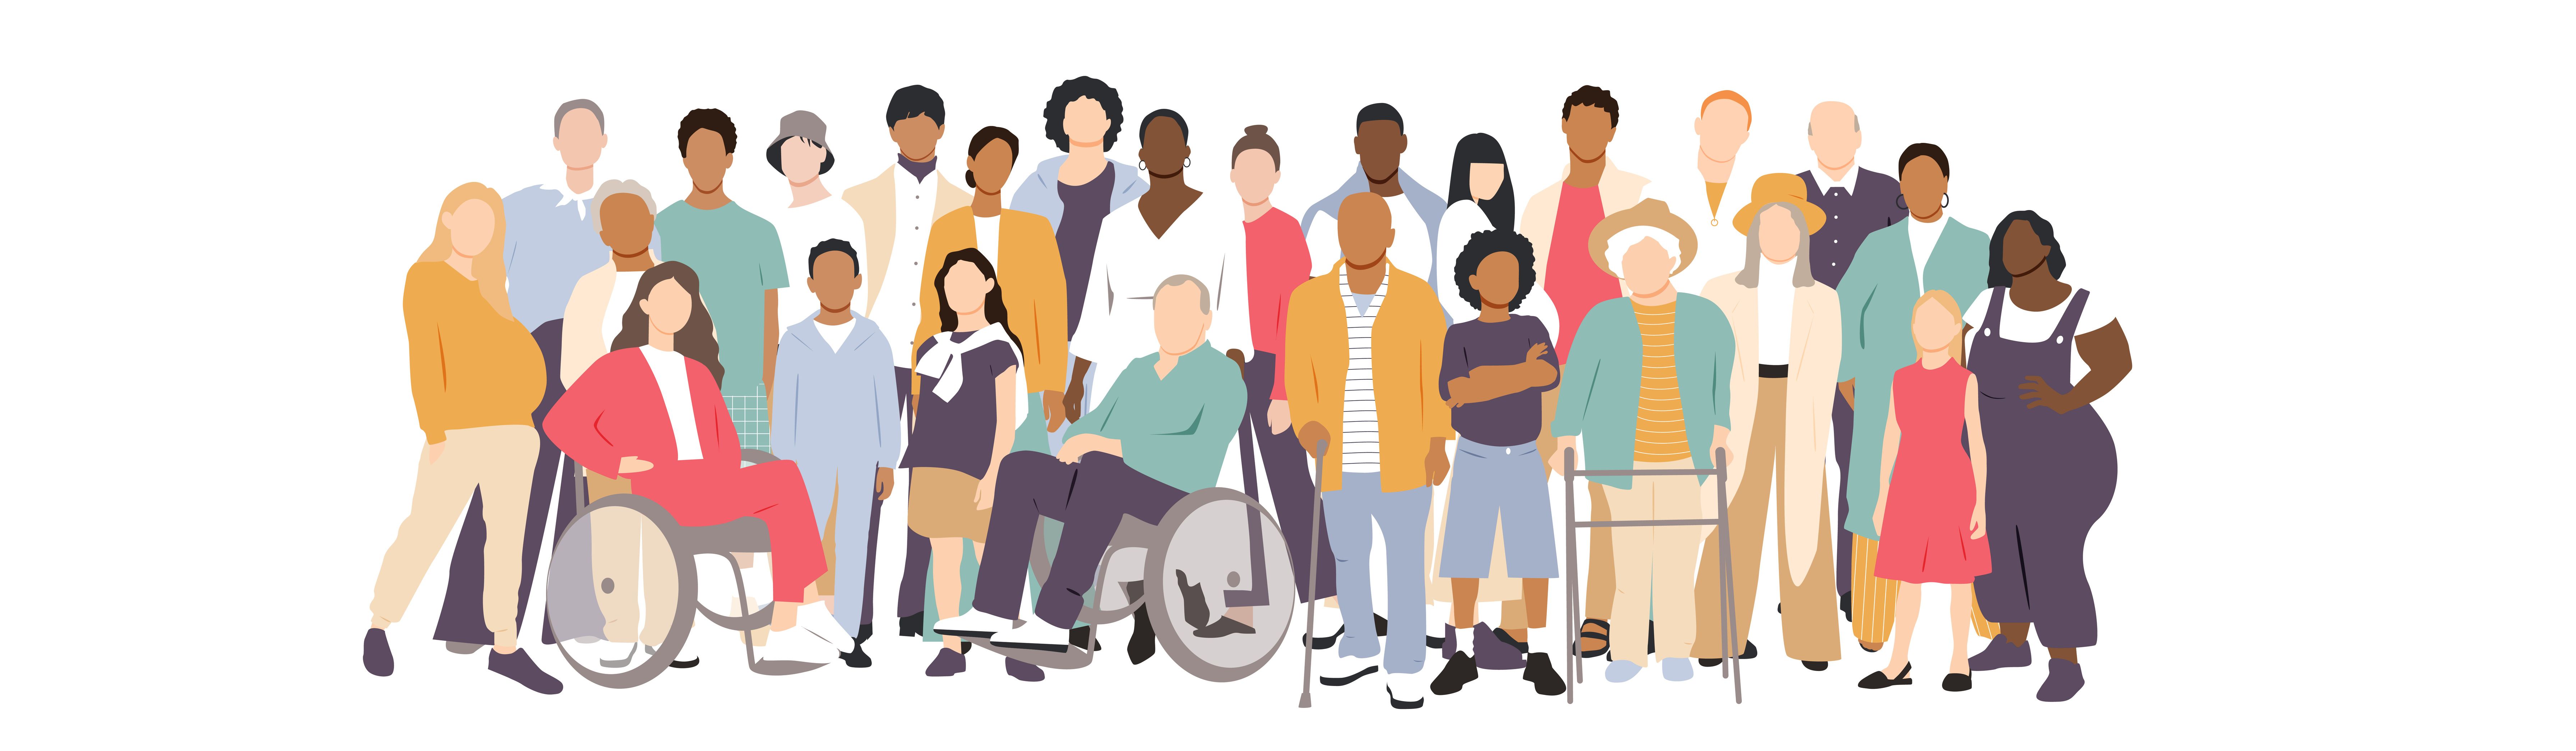 Drawing of a diverse group of people | Image Credit: Stafeeva - stock.adobe.com